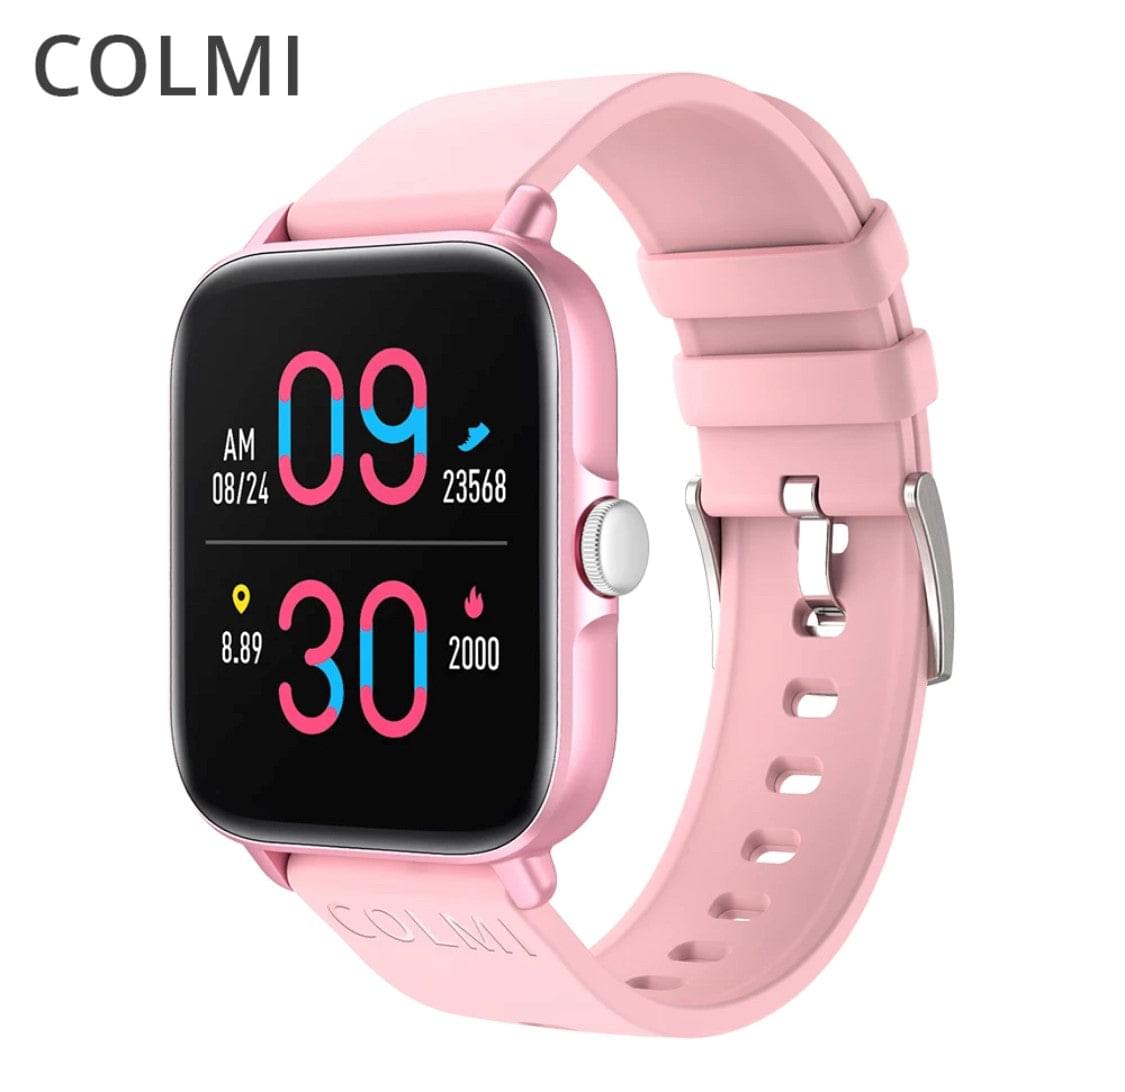 Colmi P28 Plus Gold Smart Watch South Africa